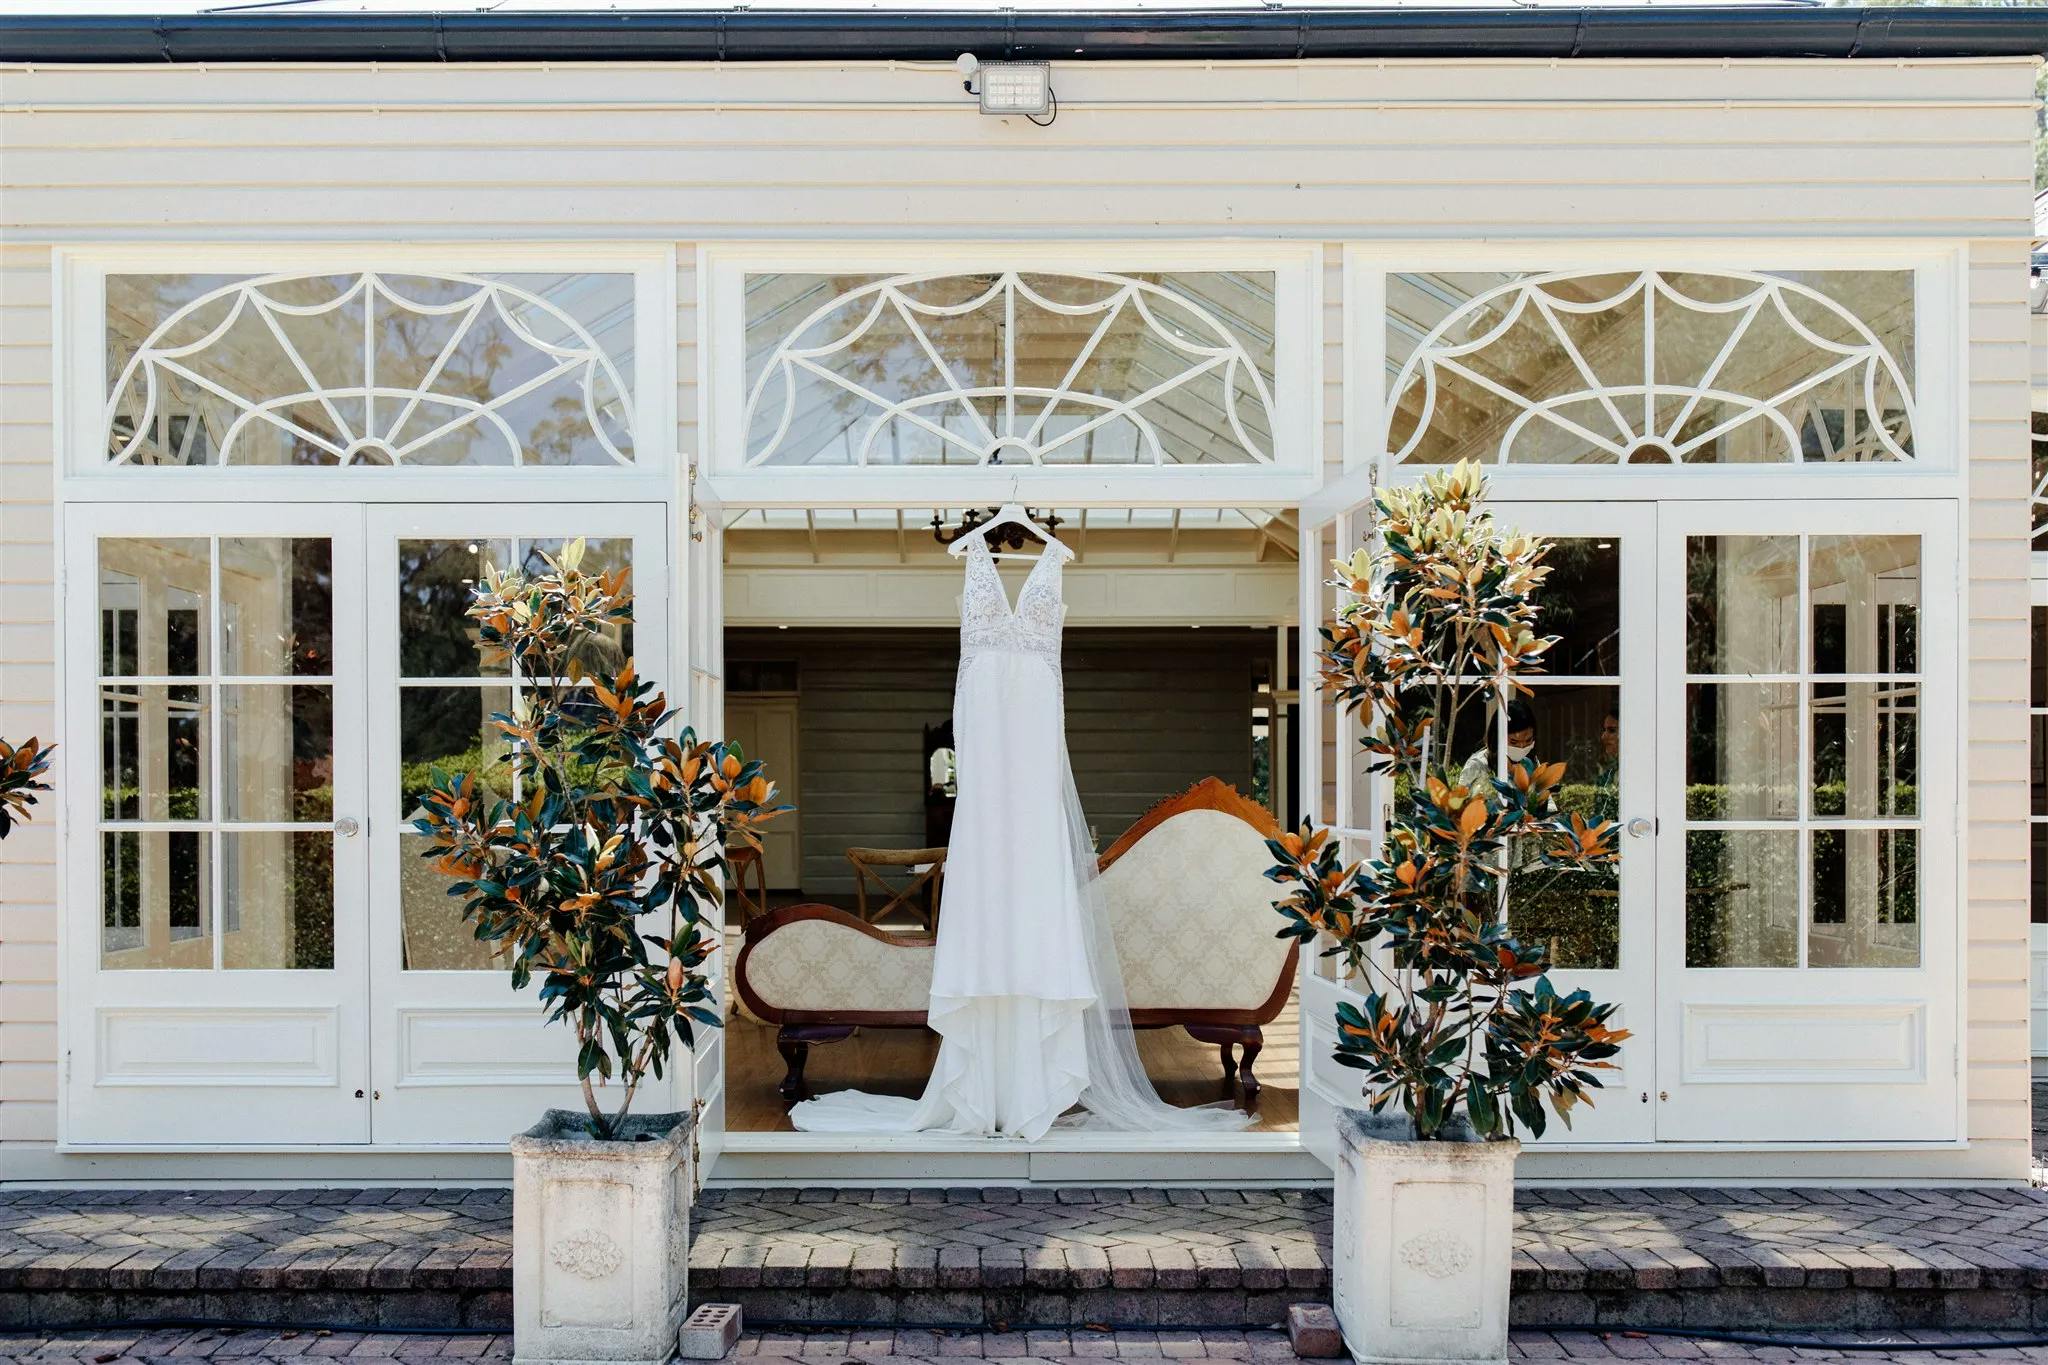 A white wedding dress hangs in front of a large elegant window. The window features multiple glass panes with decorative patterns. Two potted plants frame the entrance, and there is vintage furniture, including a sofa, visible inside the building.